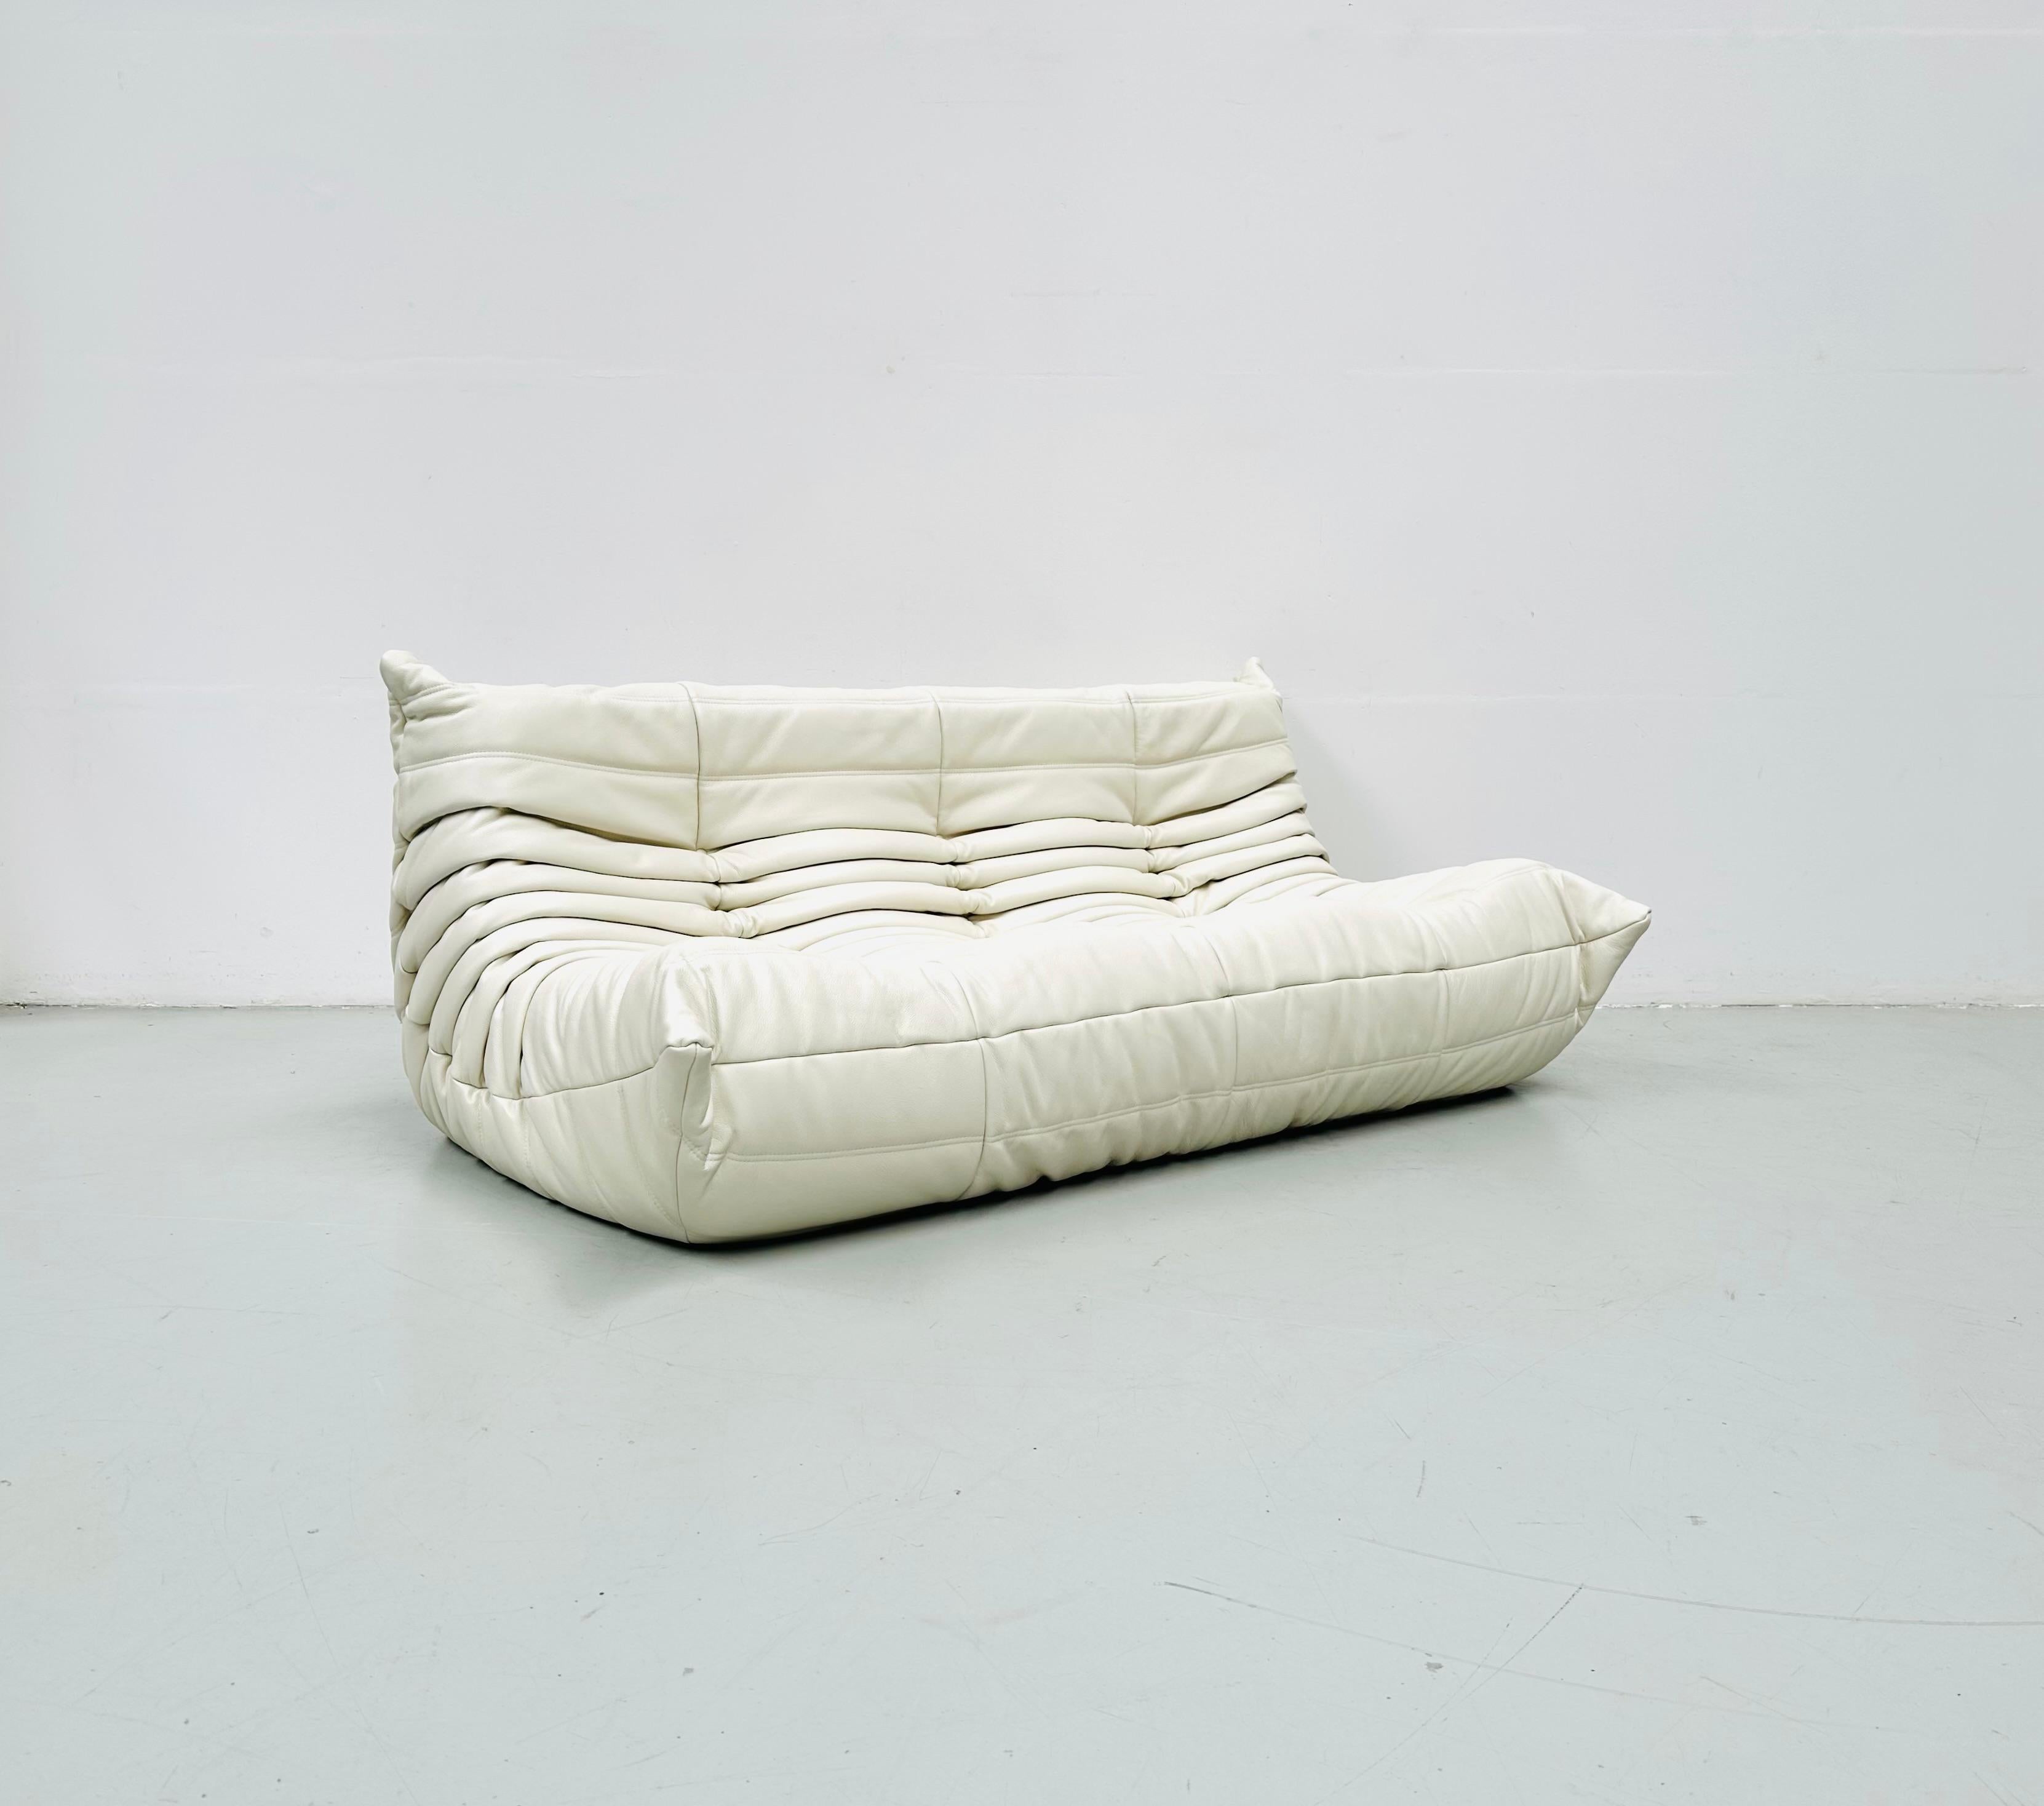 20th Century French Togo Sofa in White Leather by Michel Ducaroy for Ligne Roset.